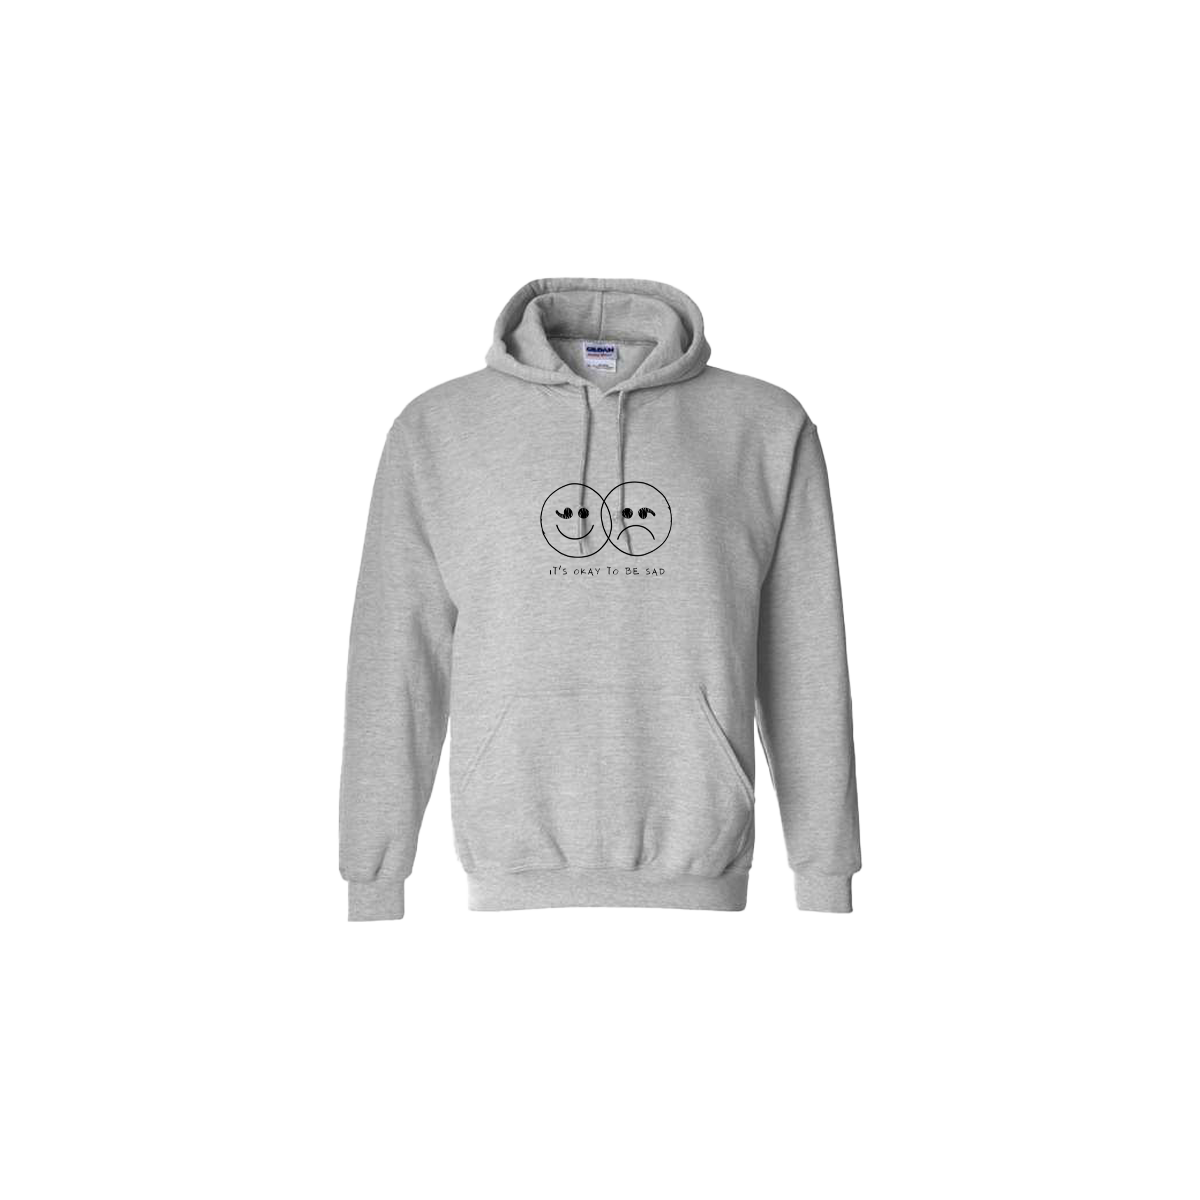 It's Okay to be Sad Double Smiley Face Embroidered Grey Hoodie - Mental Health Awareness Clothing